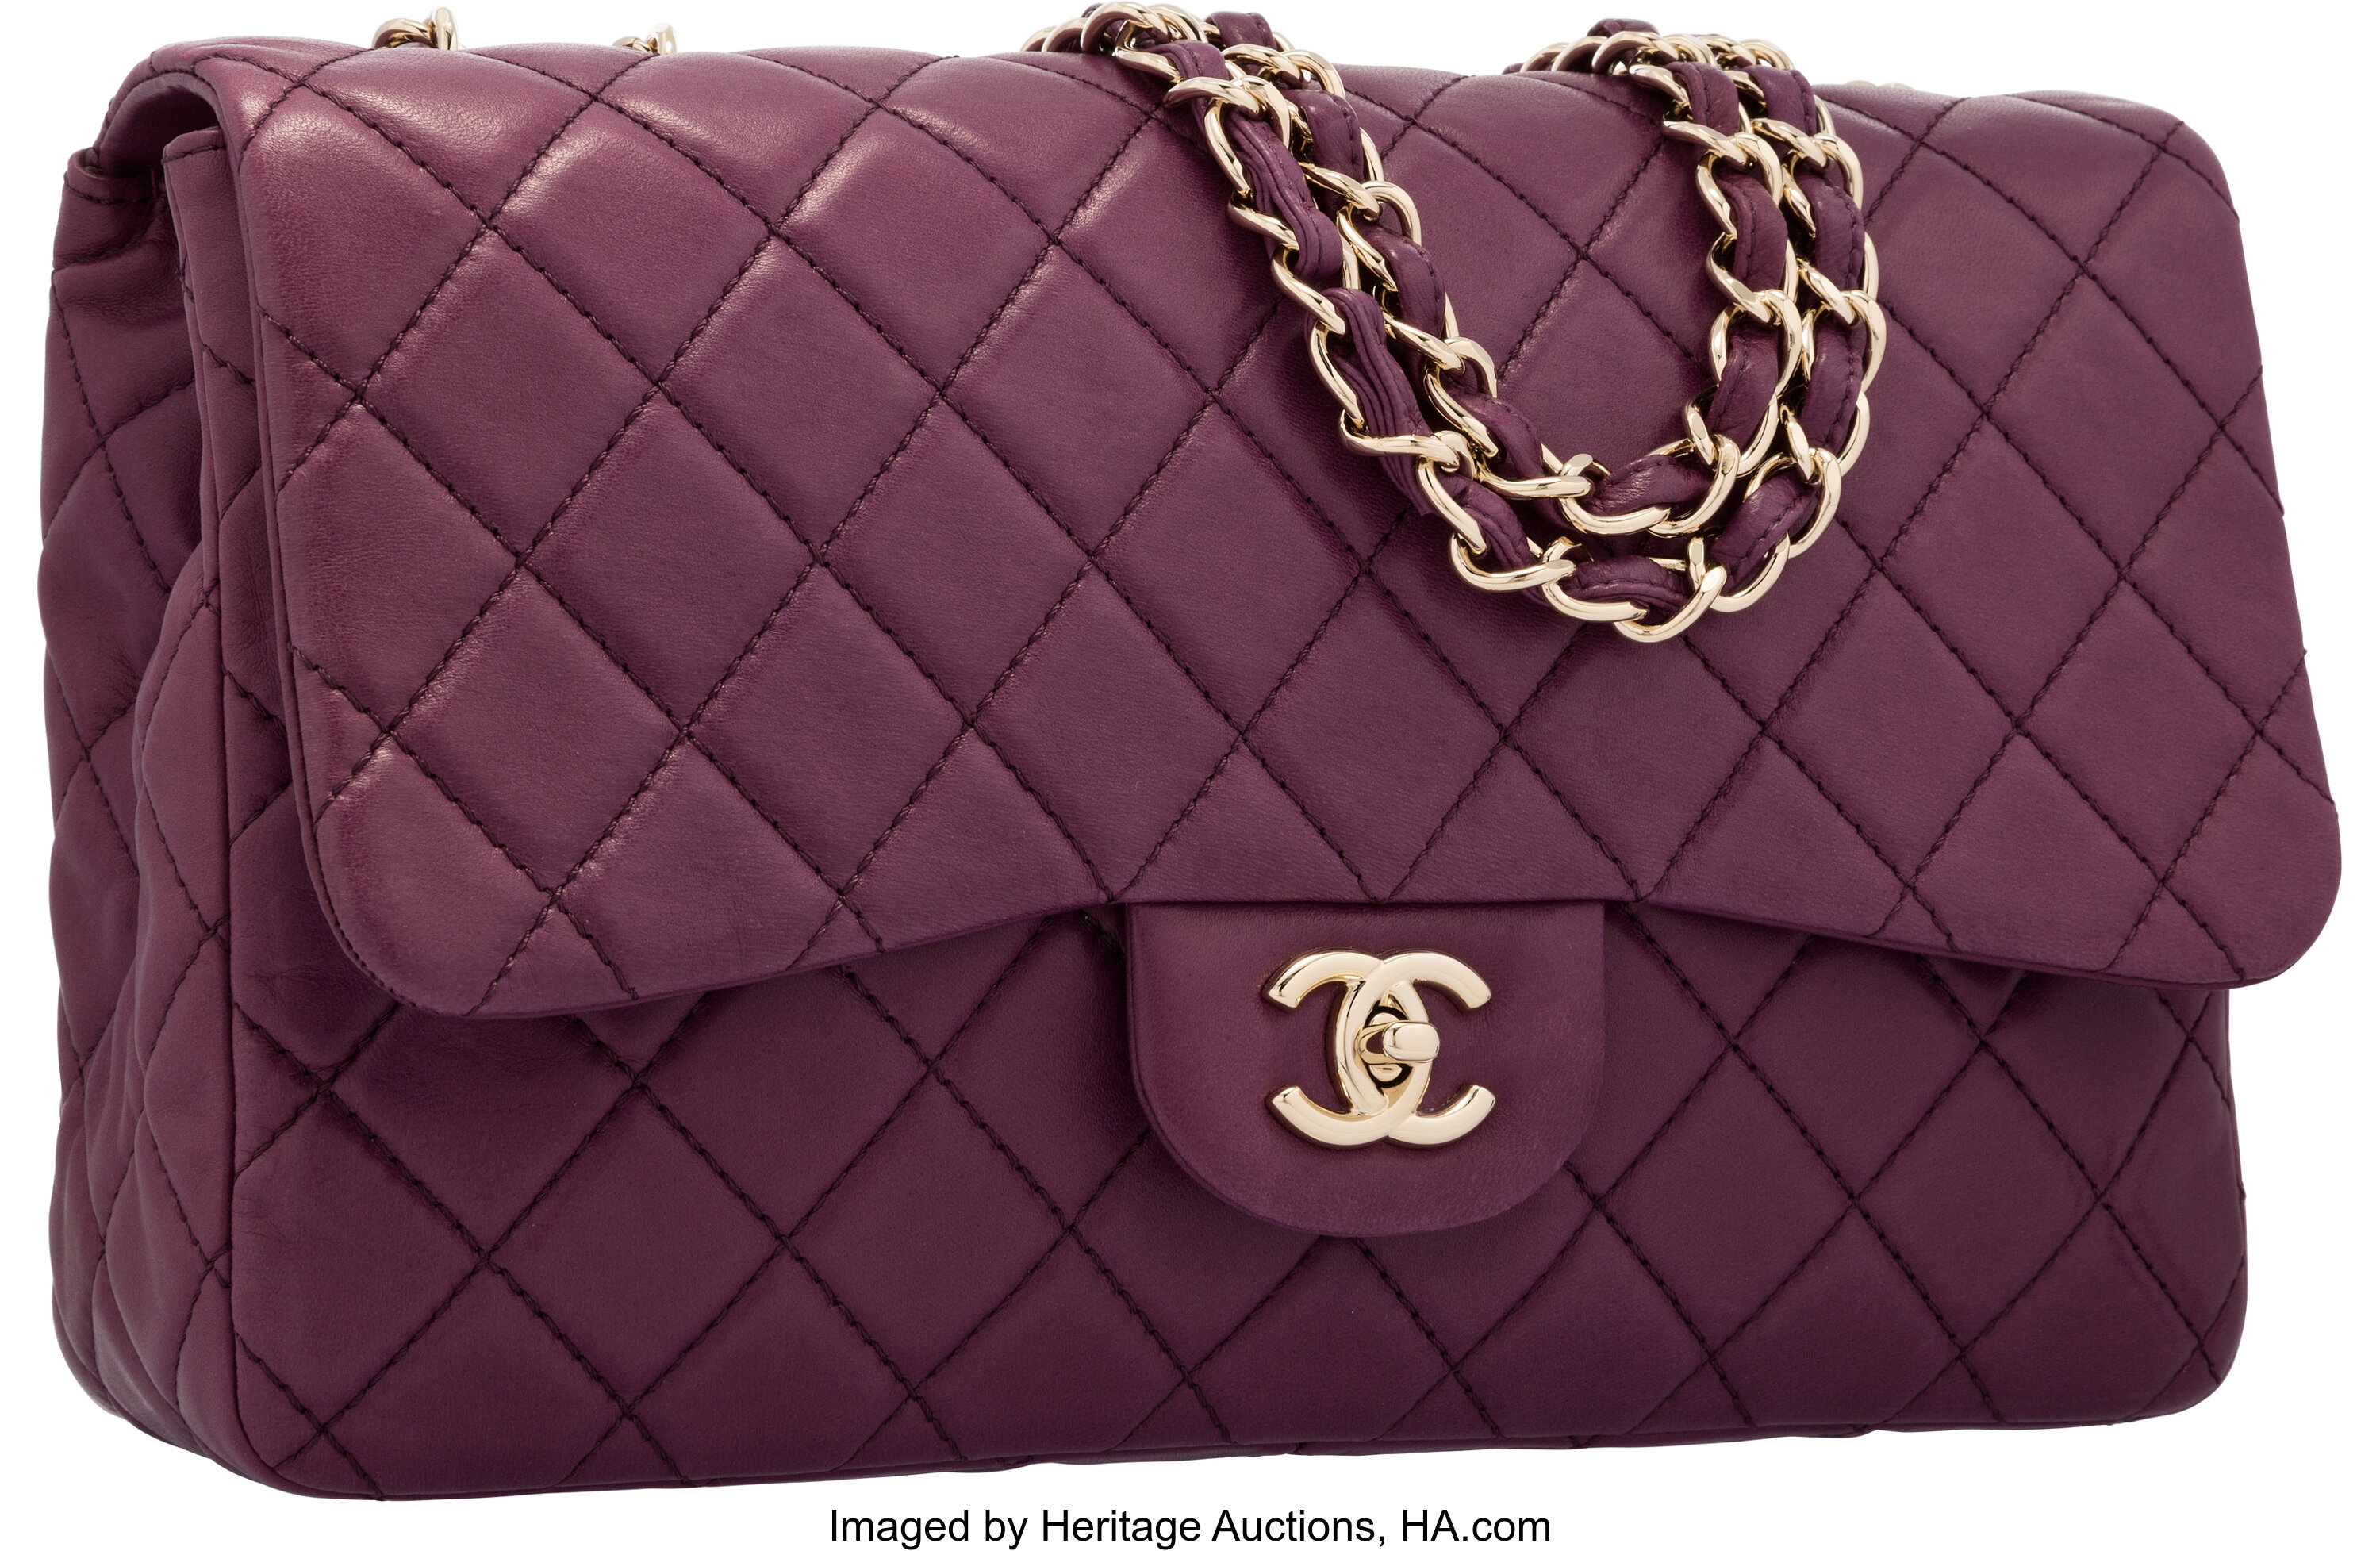 Chanel Purple Quilted Lambskin Leather Jumbo Single Flap Bag with